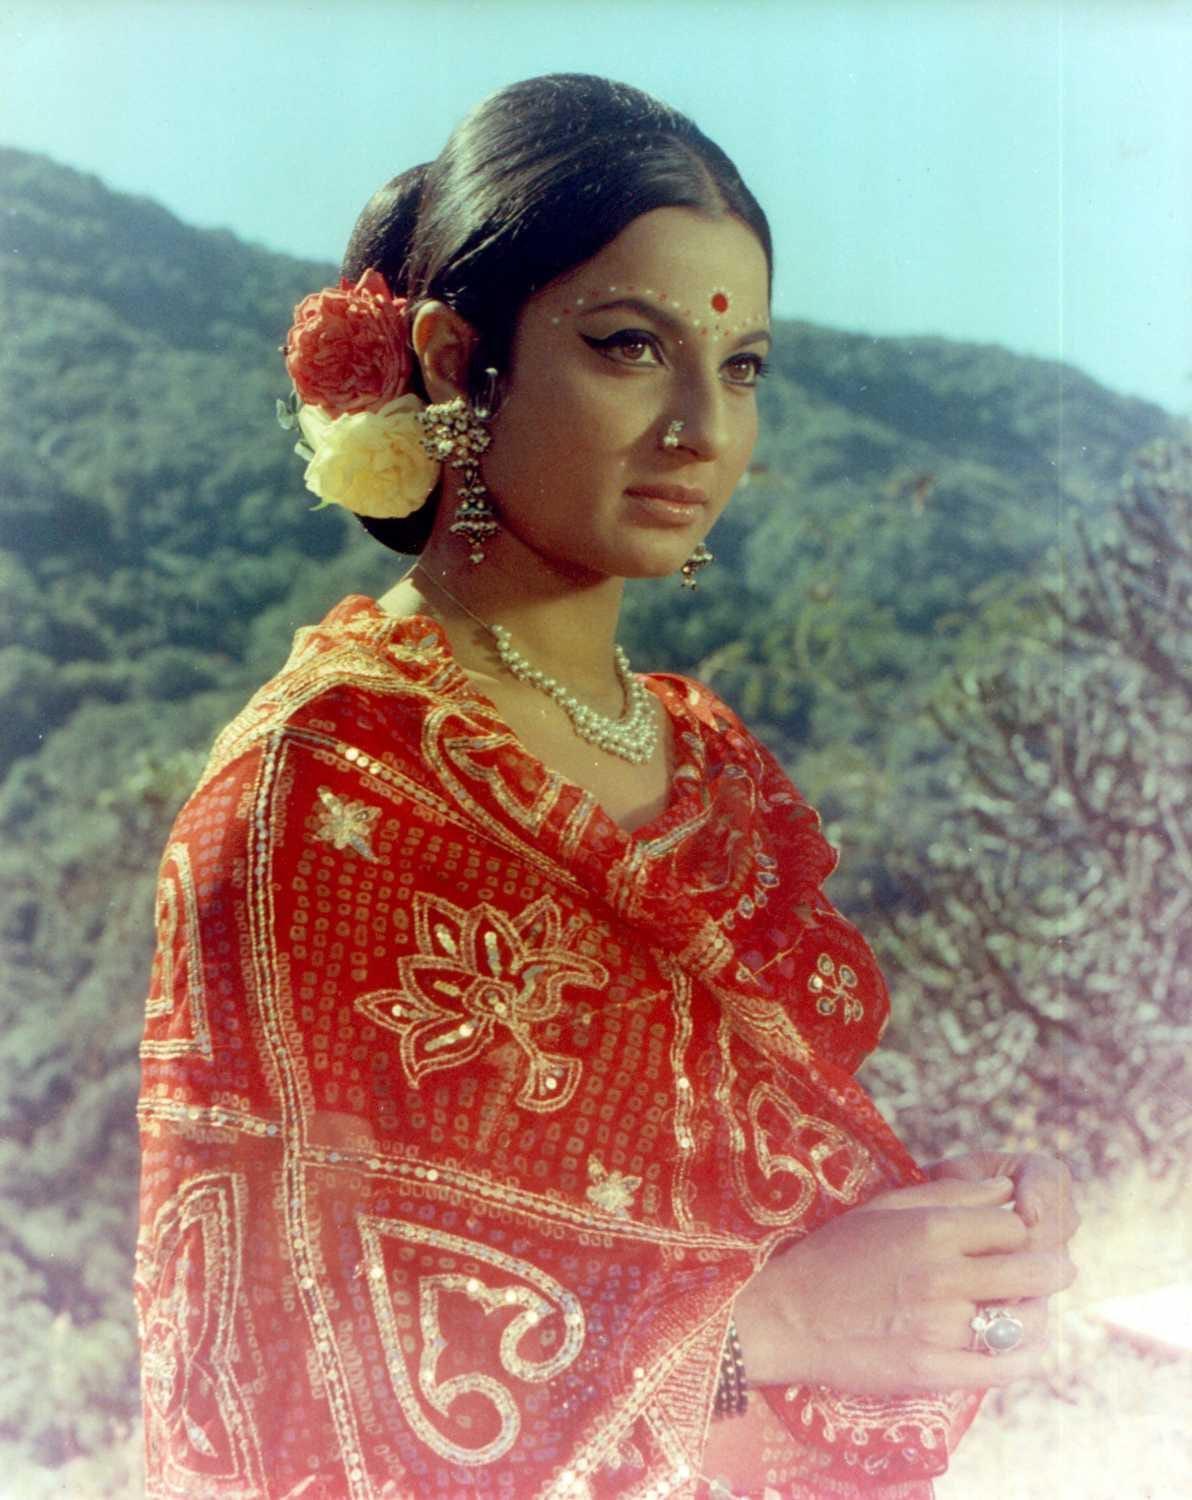 Tanuja, who happens to be Nutan's sister, had a successful career in Hindi and Bengali films. She teamed up with big-name actors like Sanjeev Kumar, Rajesh Khanna, and Dharmendra, creating movies that won over the audience. 